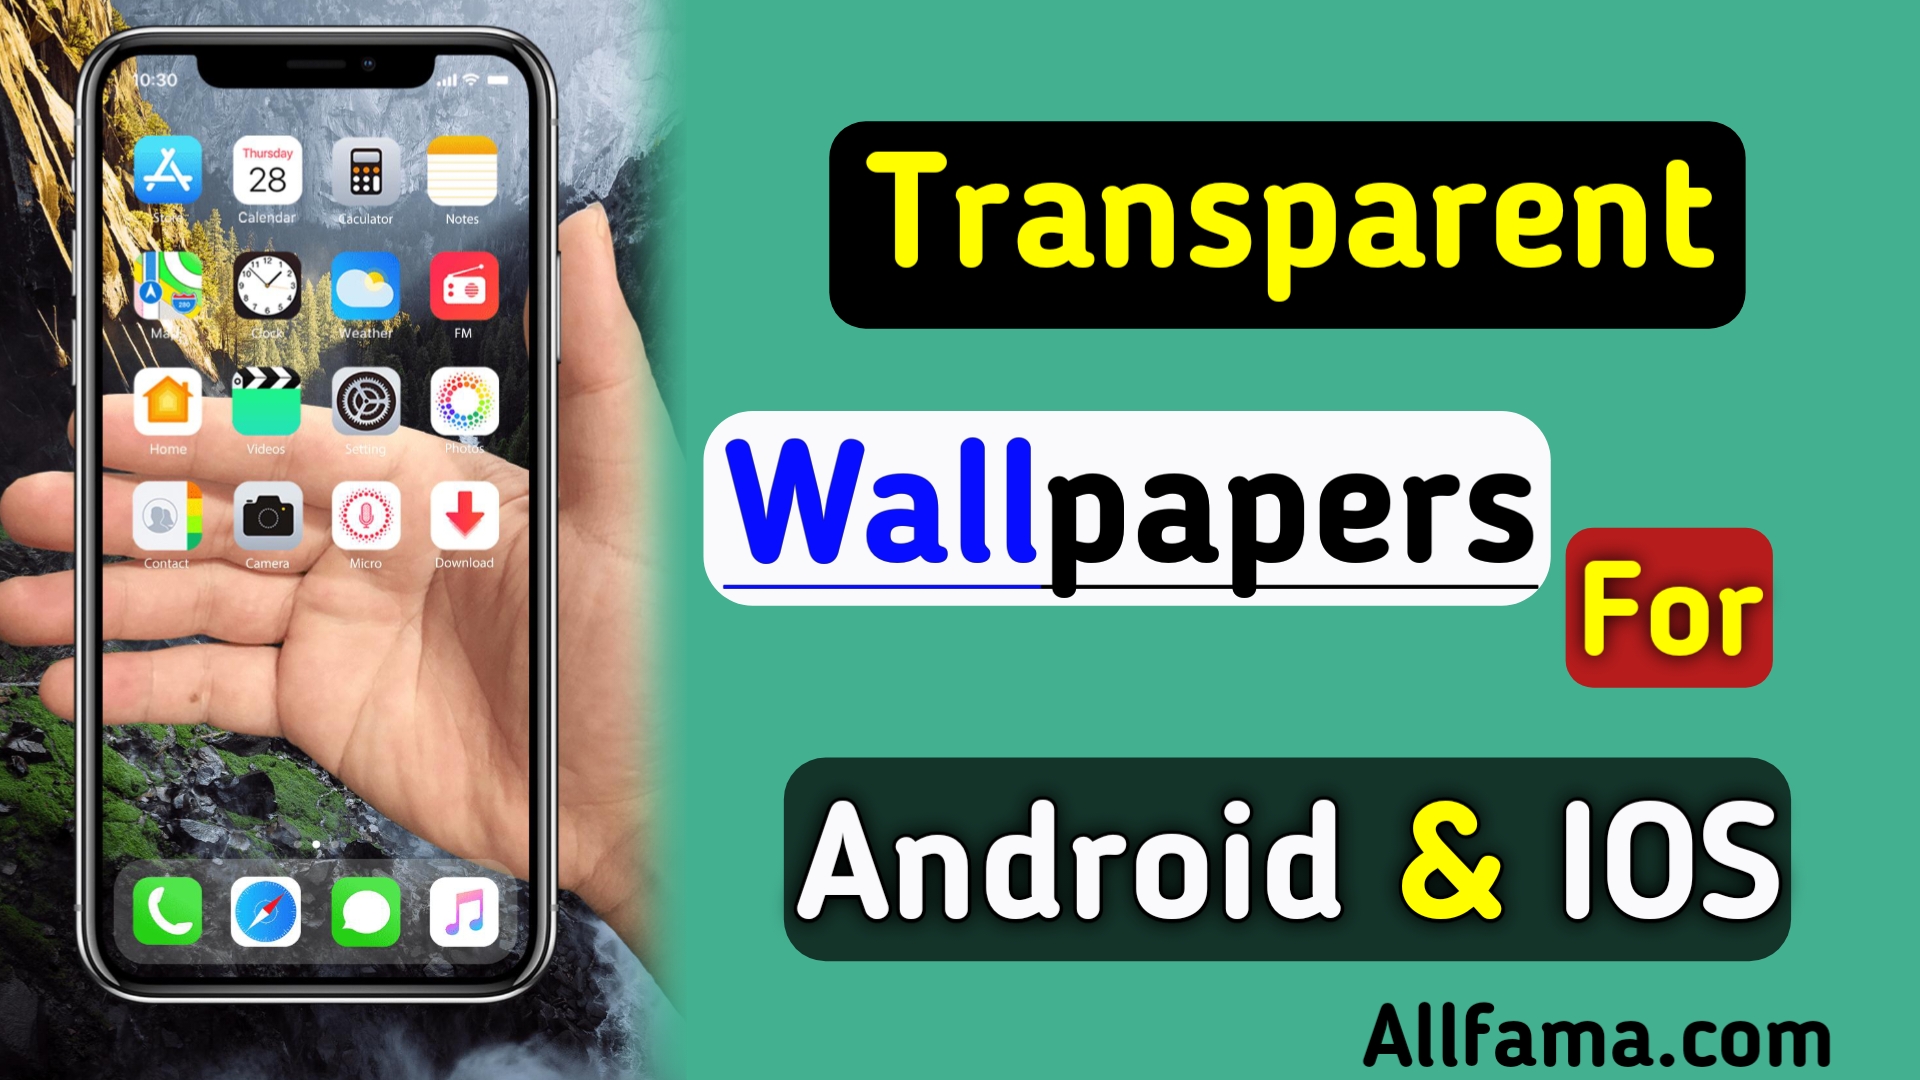 Transparent Wallpaper For Android & IOS